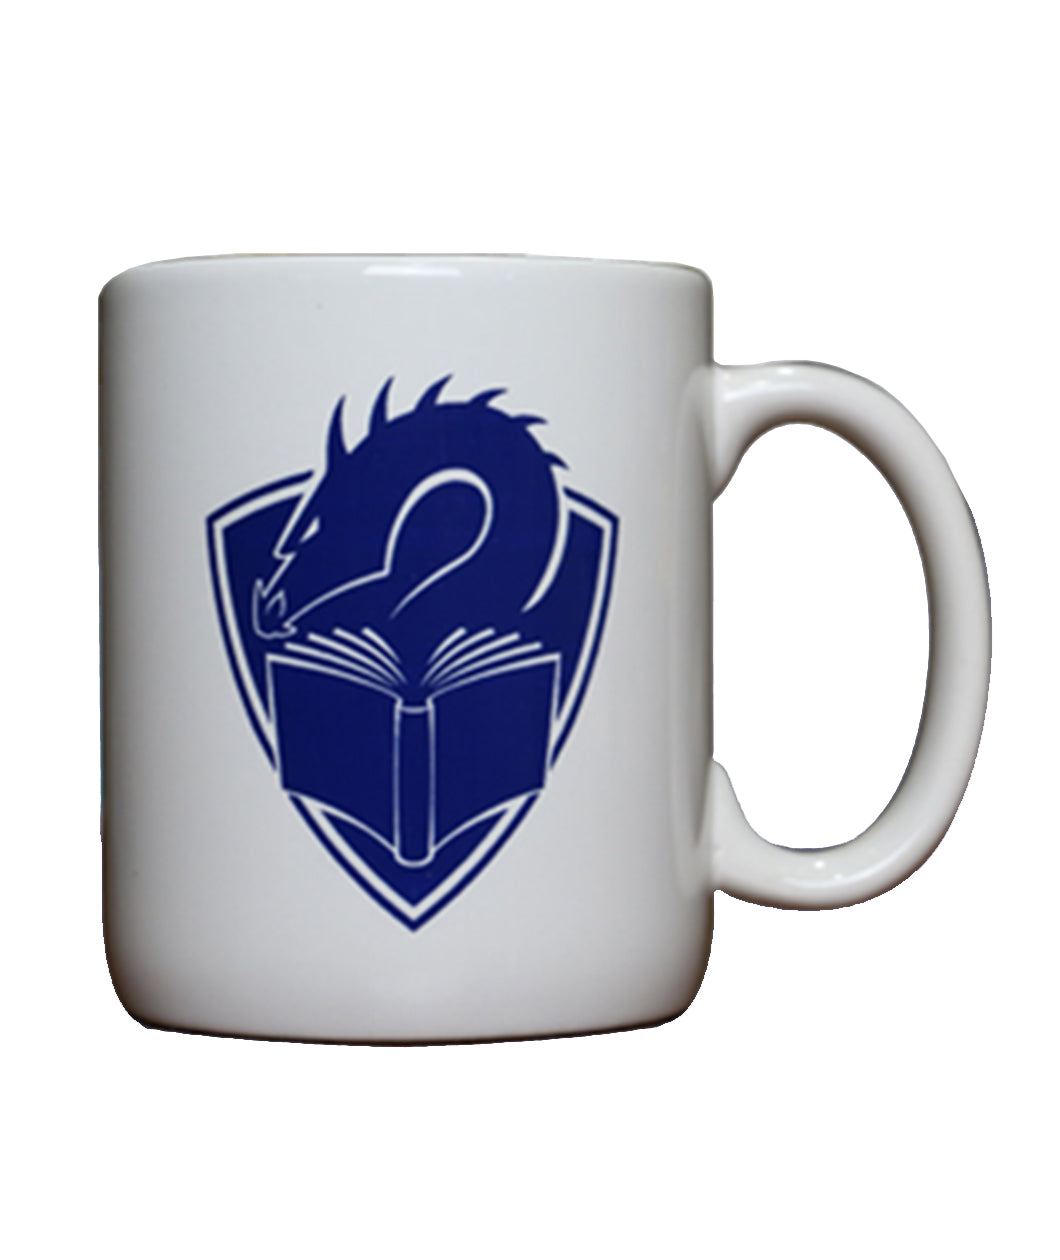 A white coffee mug with a dark blue illustration of a dragon's head peering at the pages of an open book, with a crest shape in the background. 